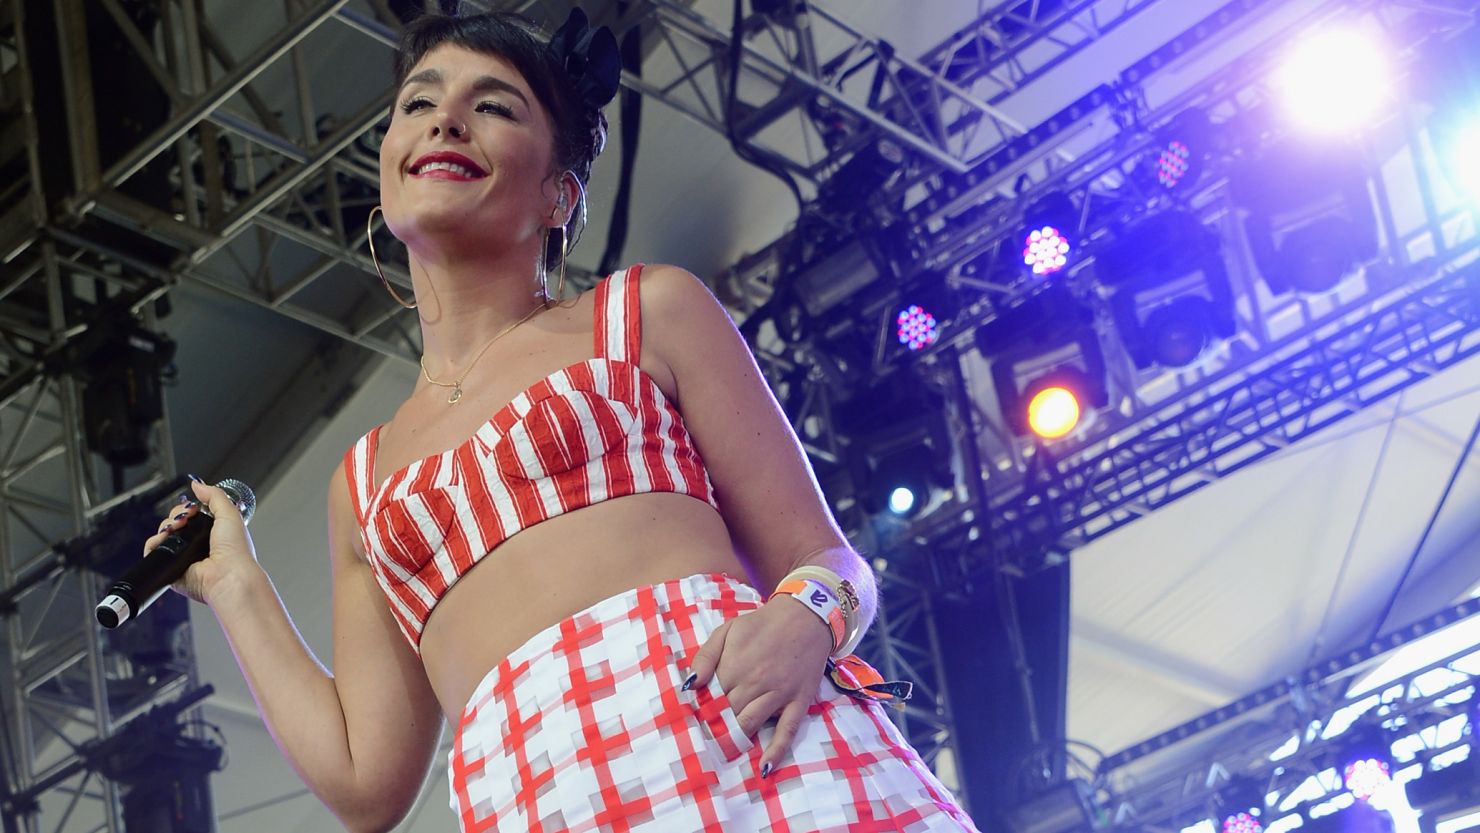 Jessie Ware performs at the Coachella Valley Music And Arts Festival in Indio, California. 